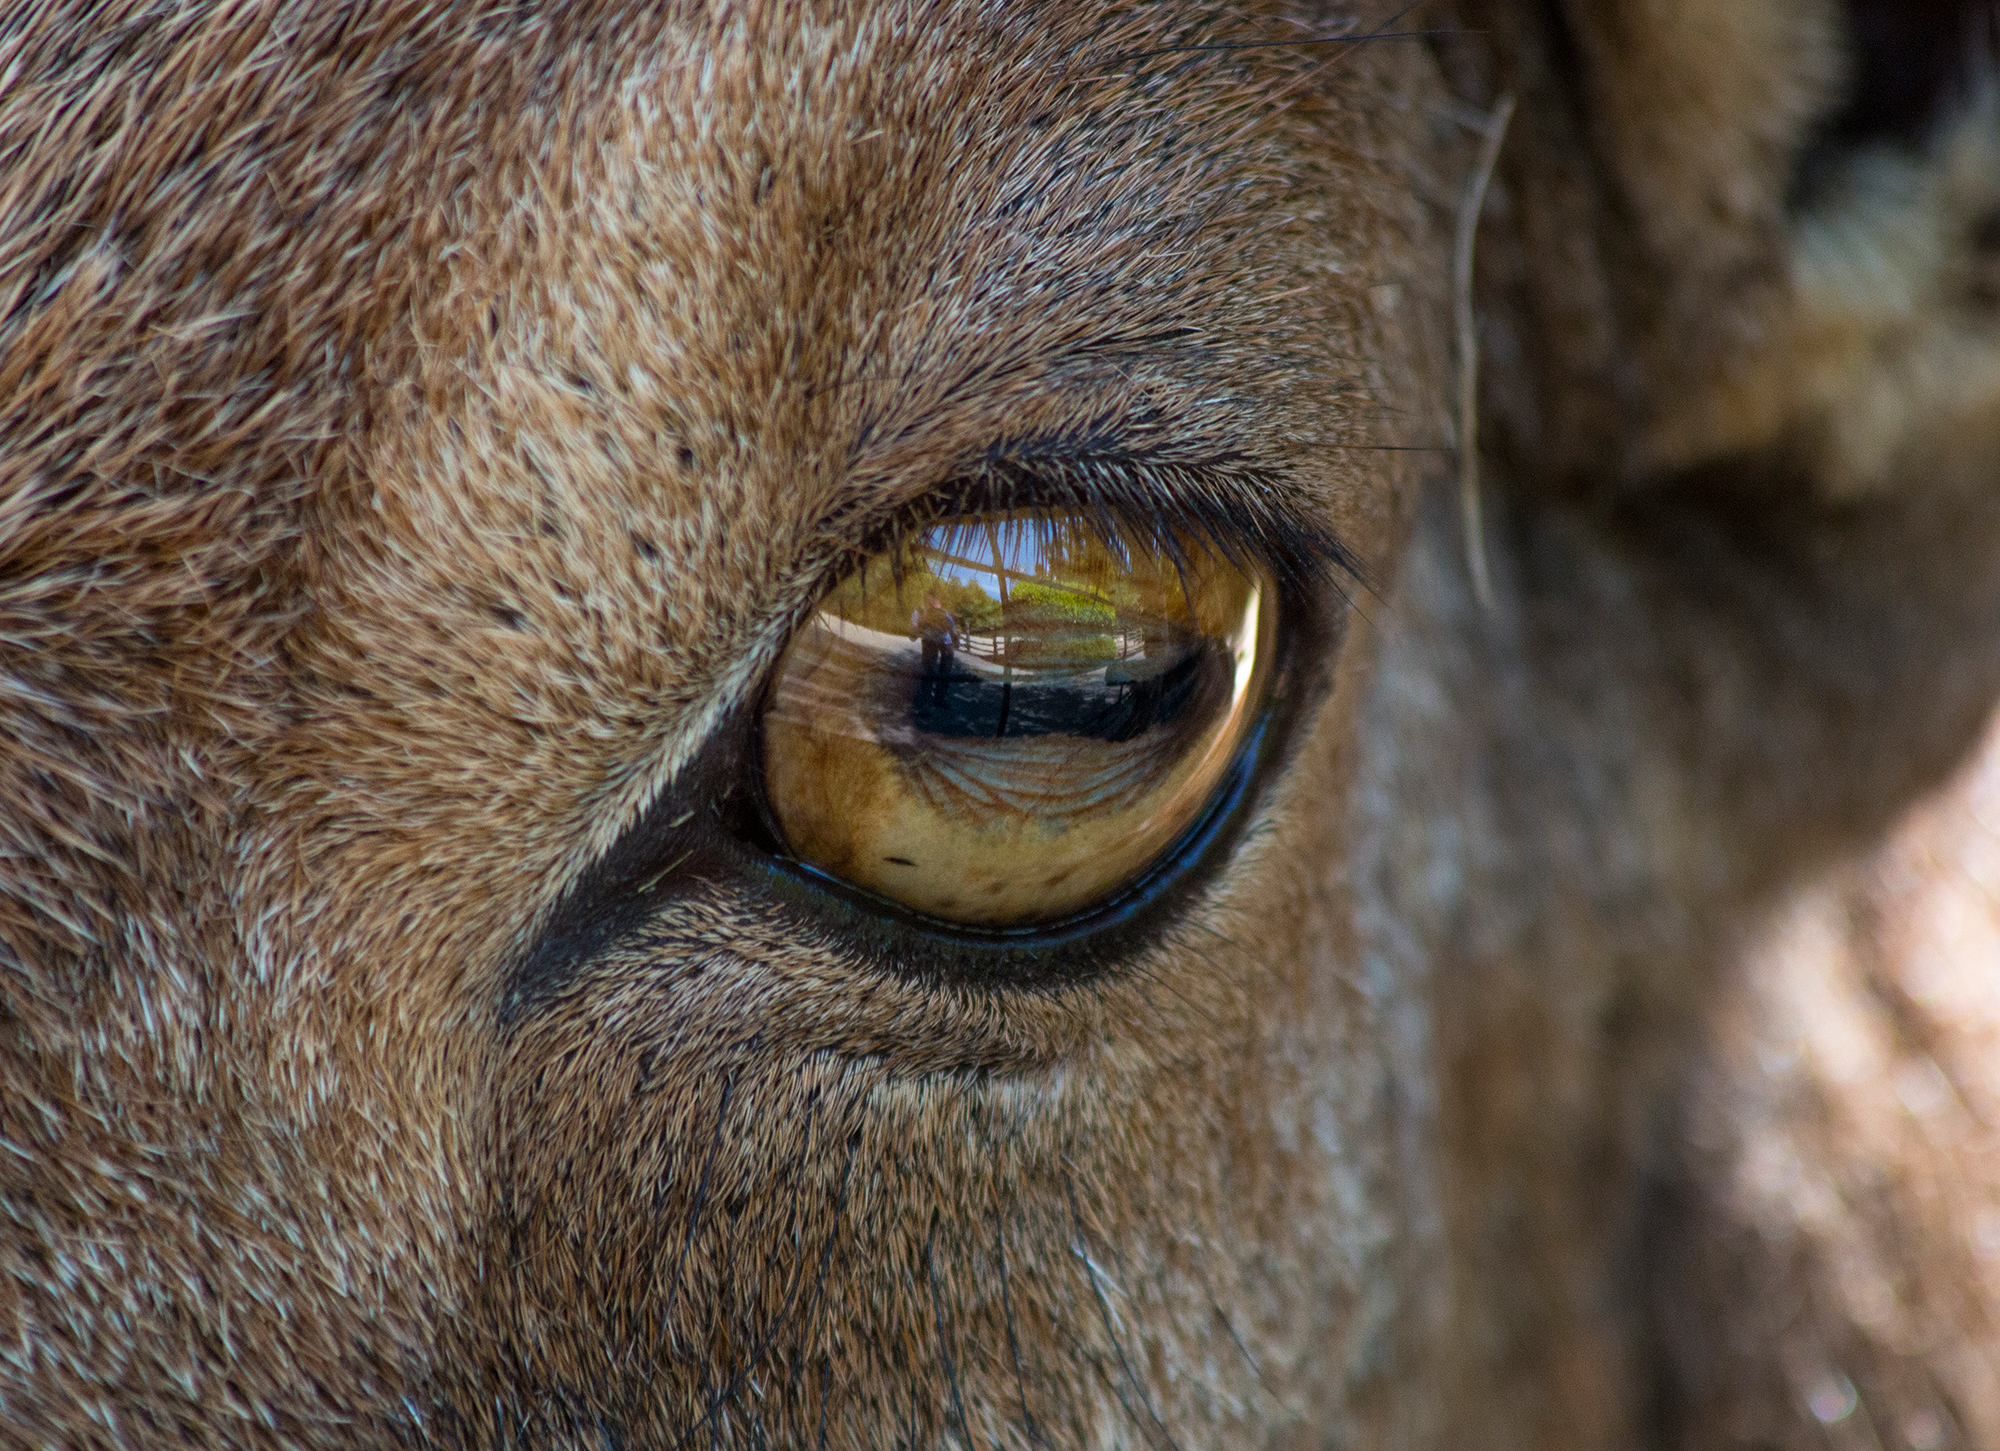 Barbary sheep, like many other grazing prey animals, have horizontal pupils and eyes on the side of their heads.